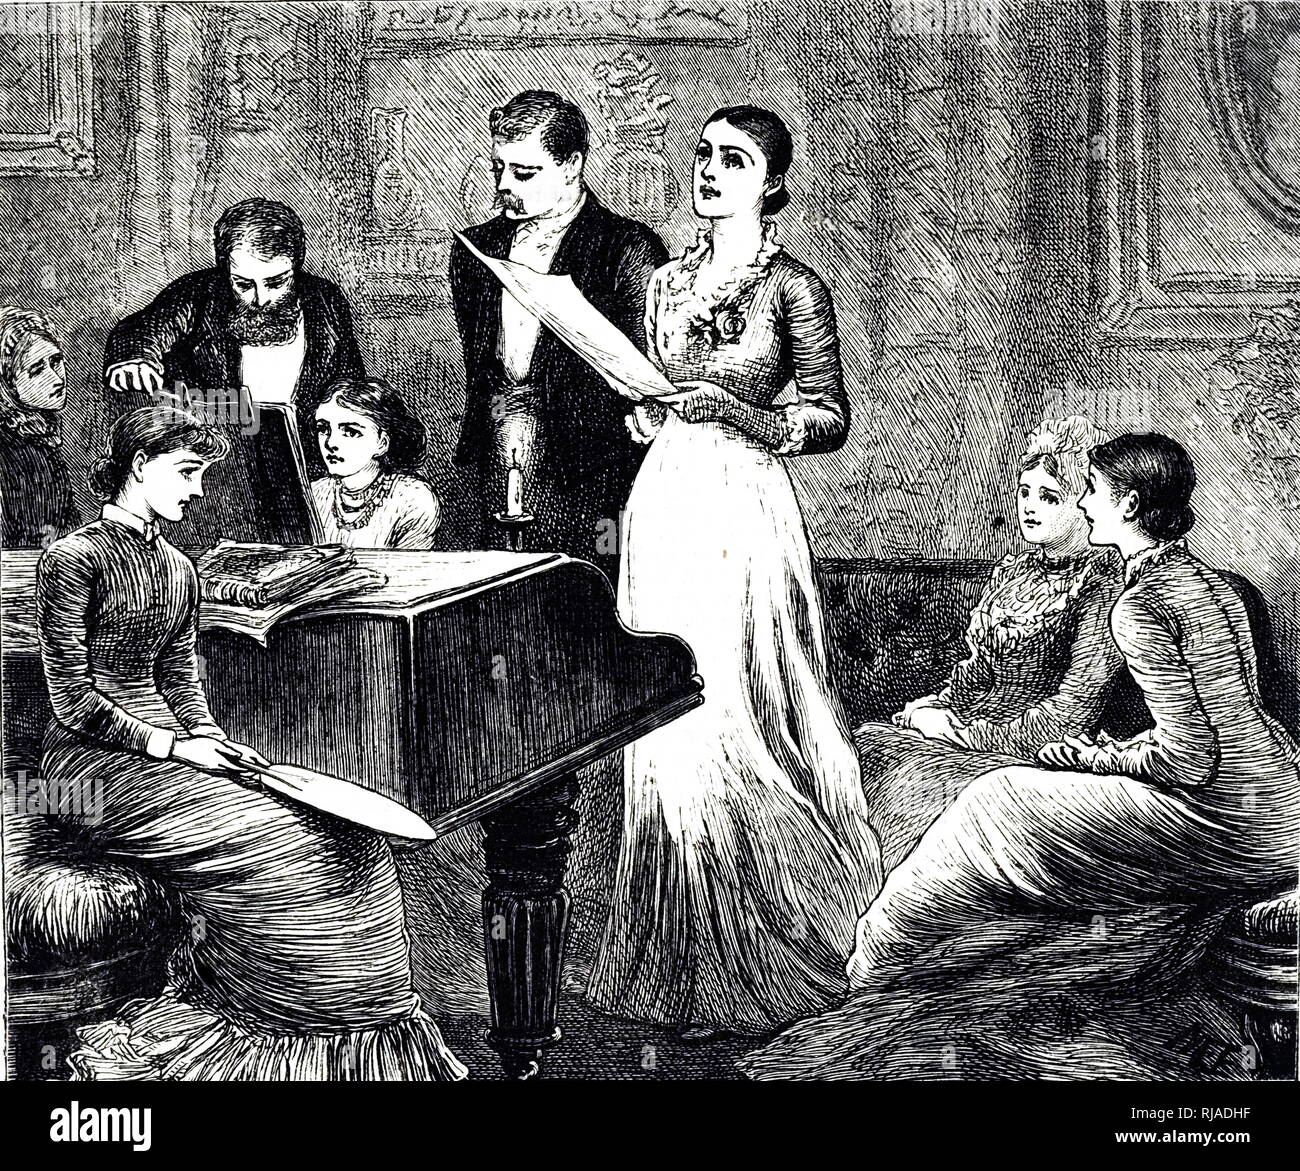 An engraving depicting a musical evening. Illustrated by Mary Ellen Edwards (1838-1934) an English artist and illustrator of children's books. Dated 19th century Stock Photo